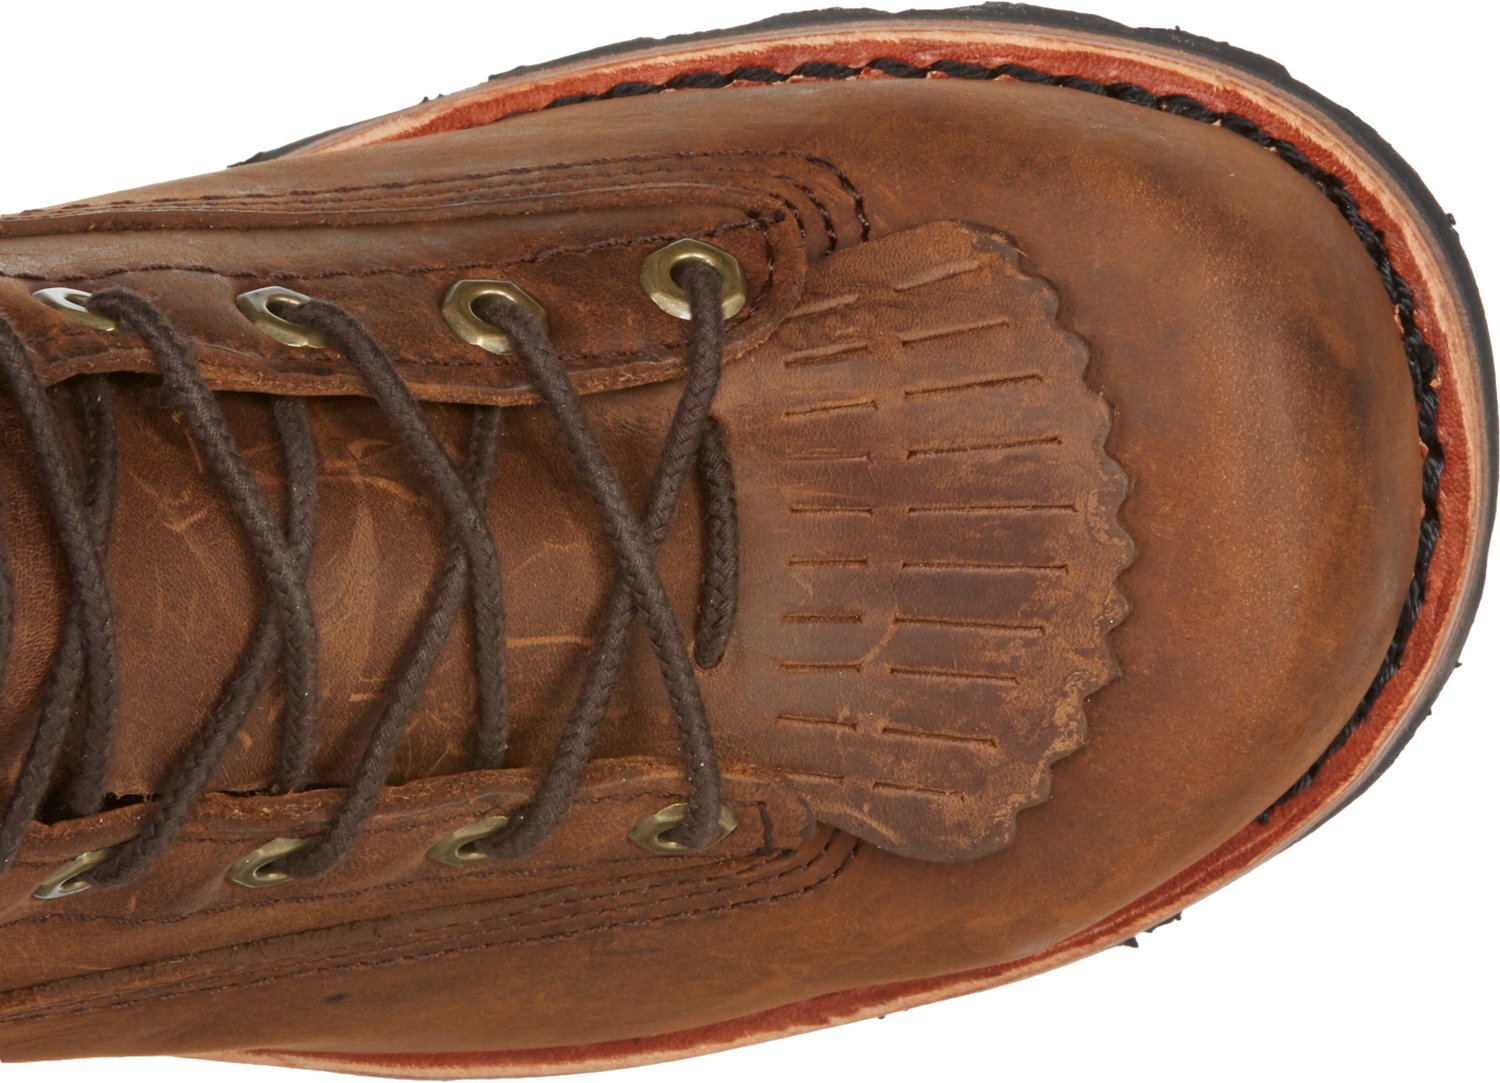 Chippewa Boots Men's Bay Apache EH Steel Toe Lace Up Work Boots | Academy